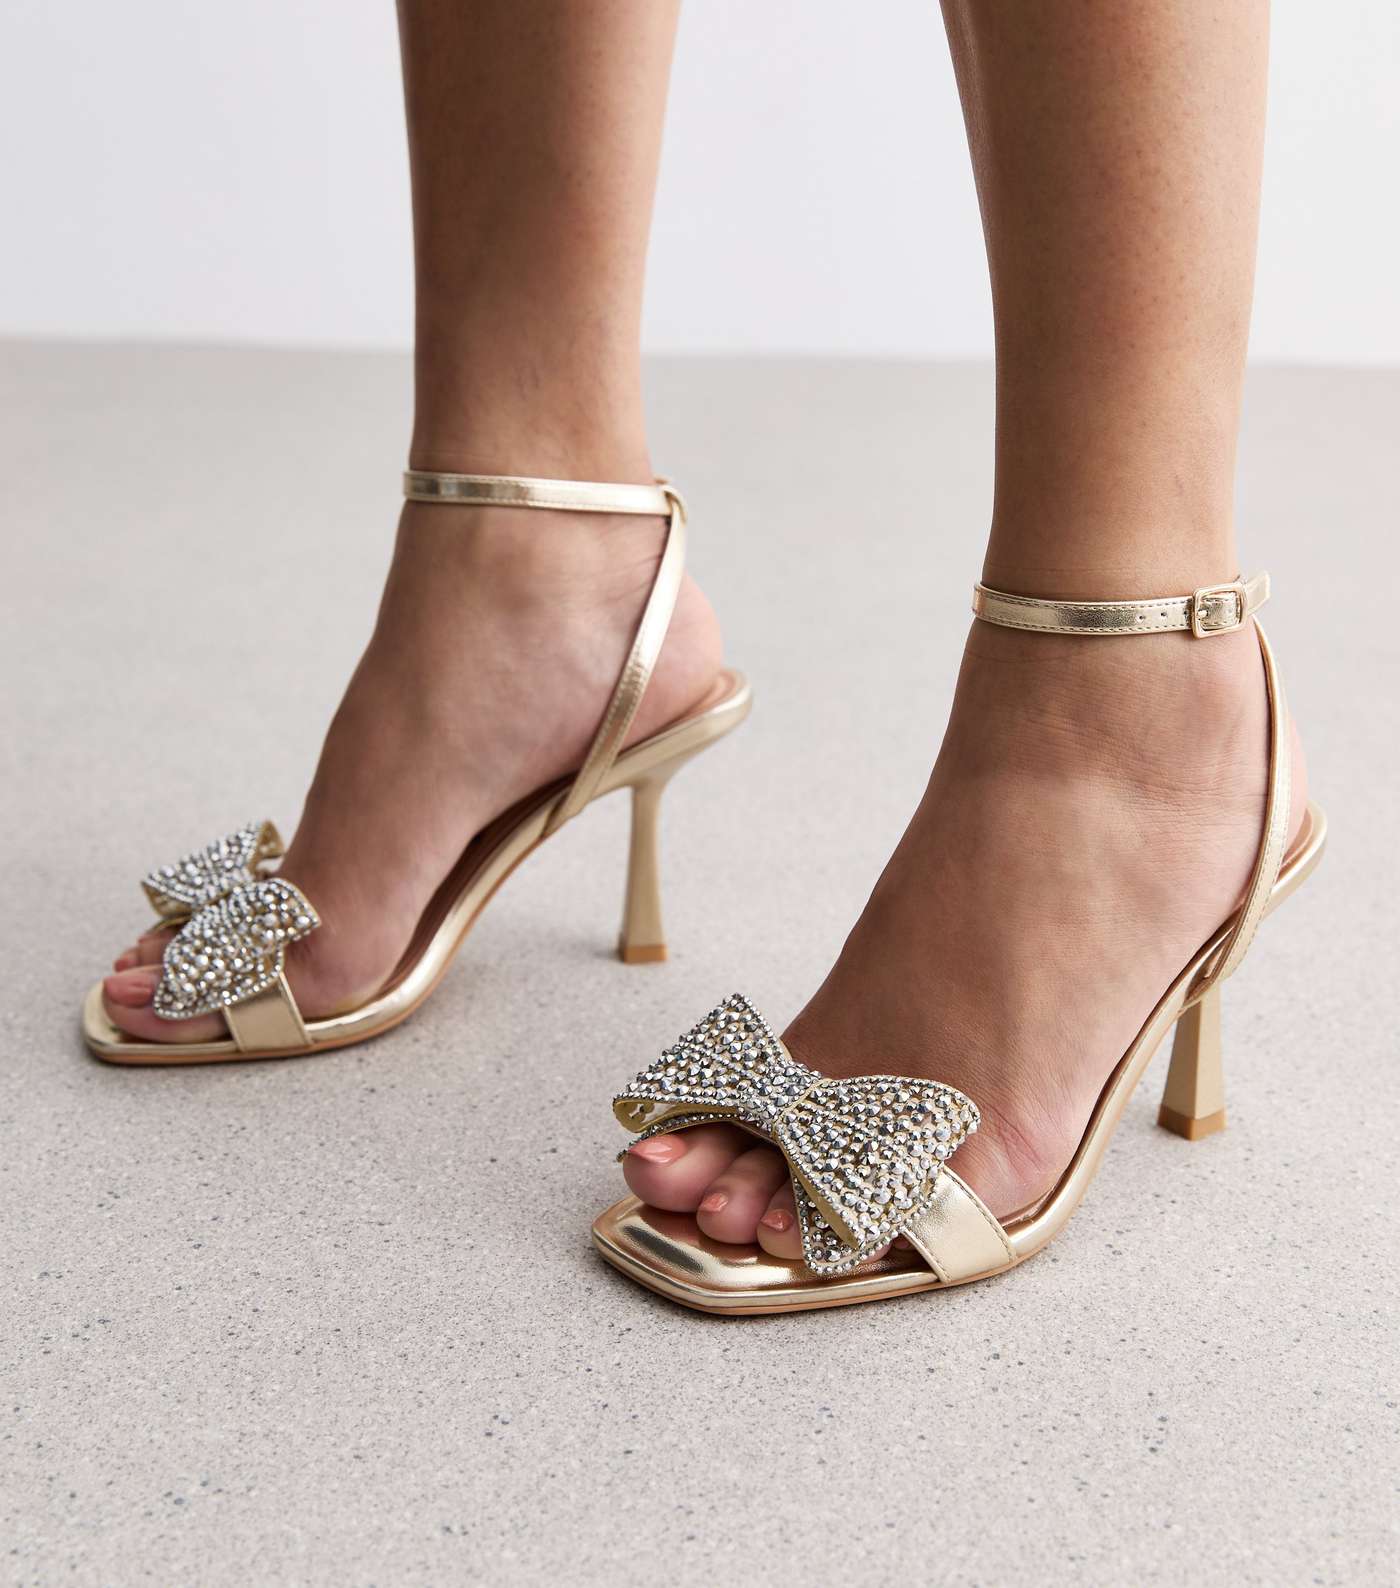 Gold Studded Bow Stiletto Heel Sandals Image 2